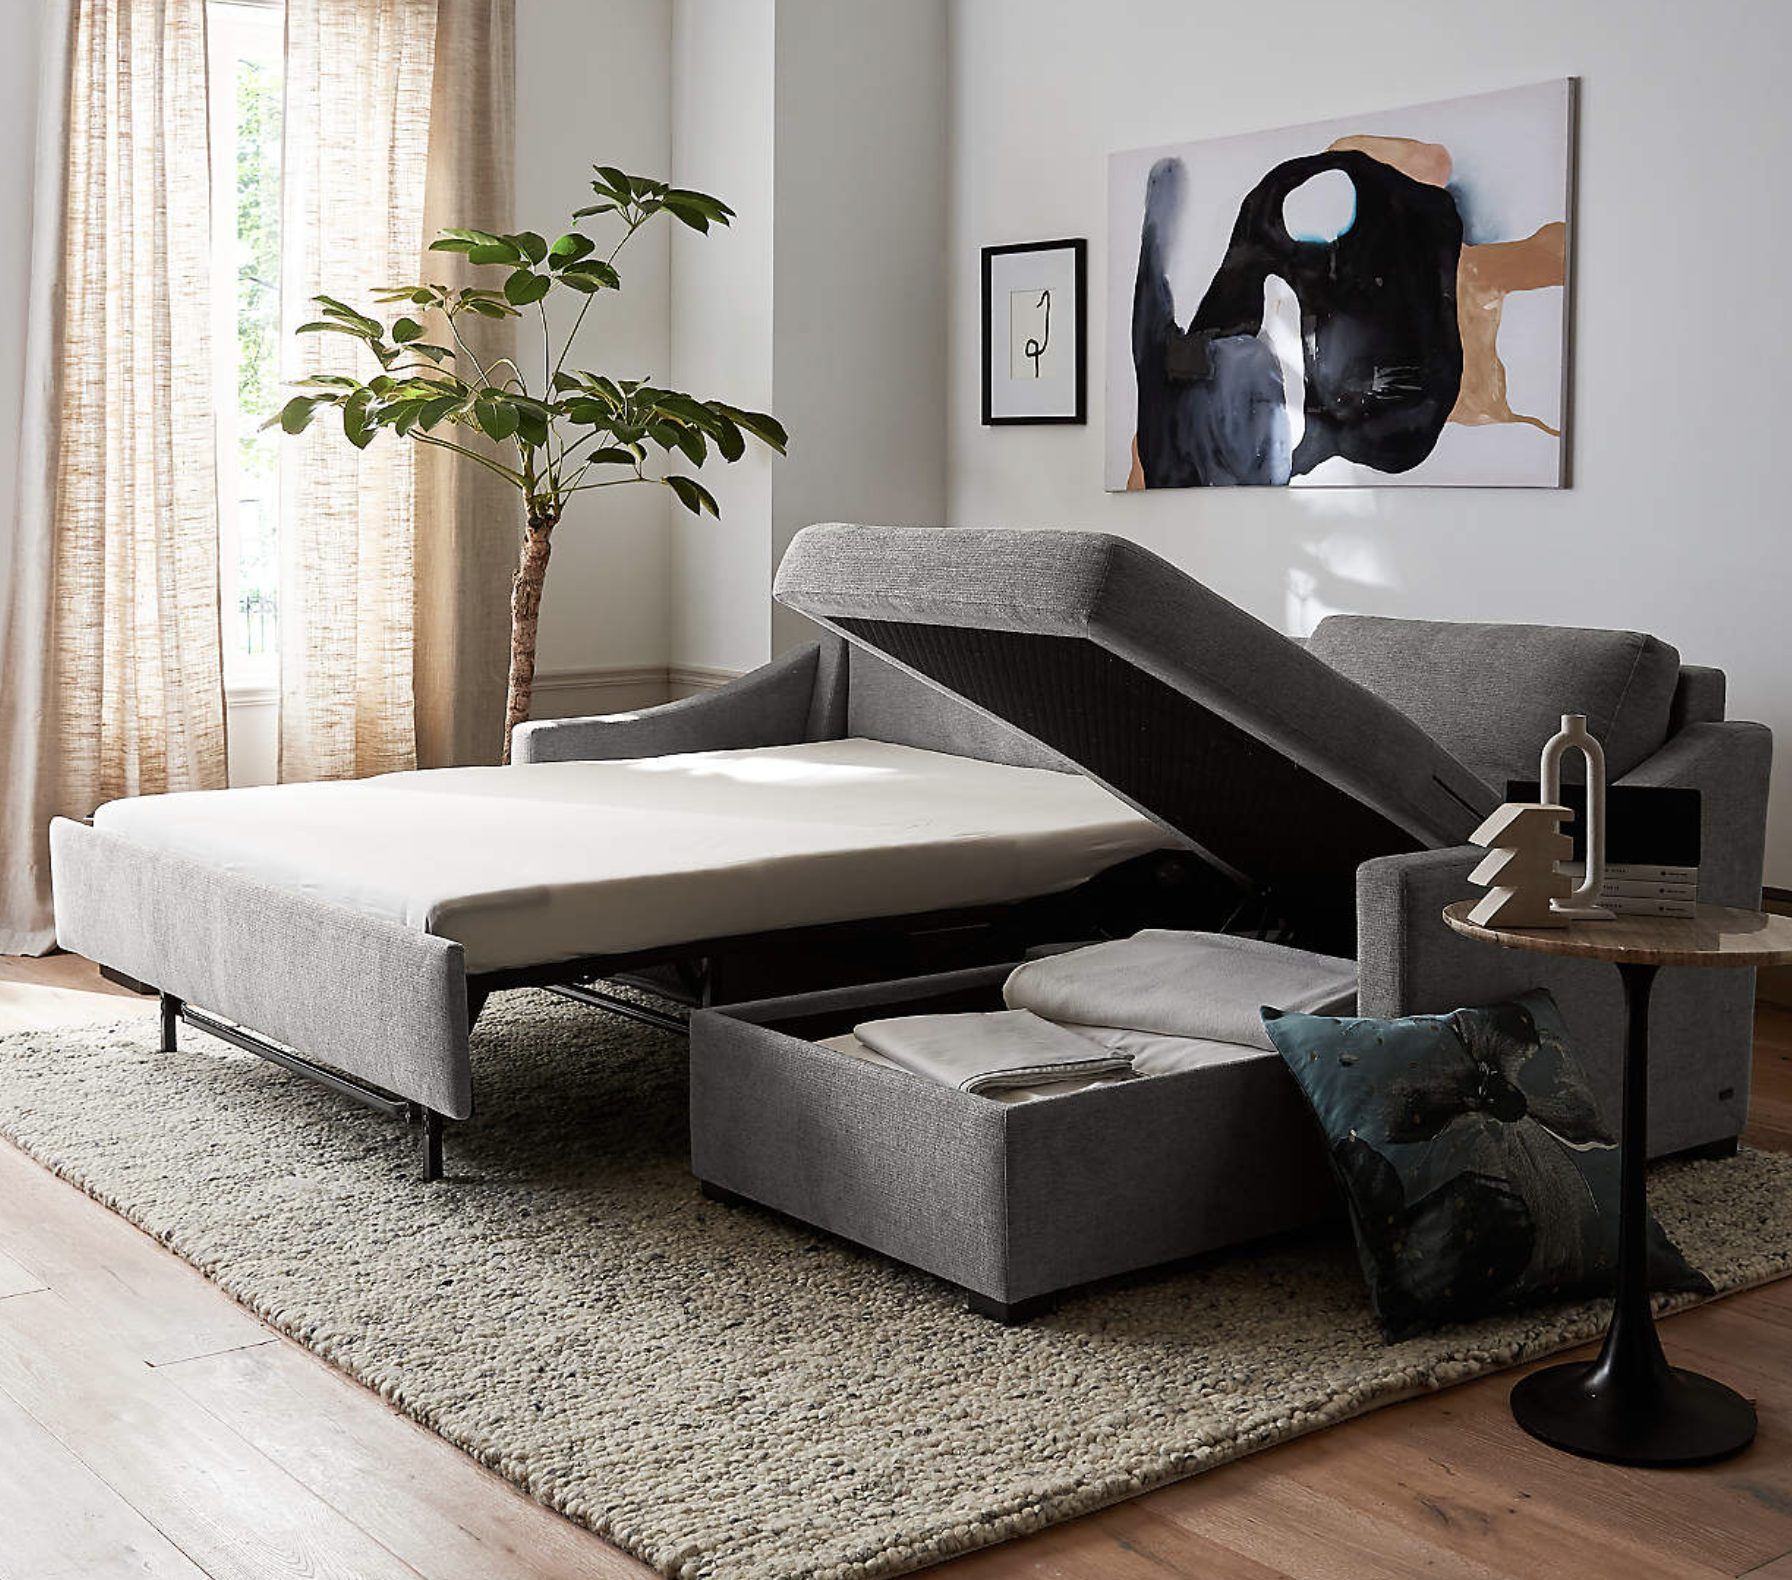 27 Of The Best Sectional Couches With Pull Out Beds In 2023 – Happily  Inspired Regarding Pull Out Couch Beds (Gallery 6 of 20)